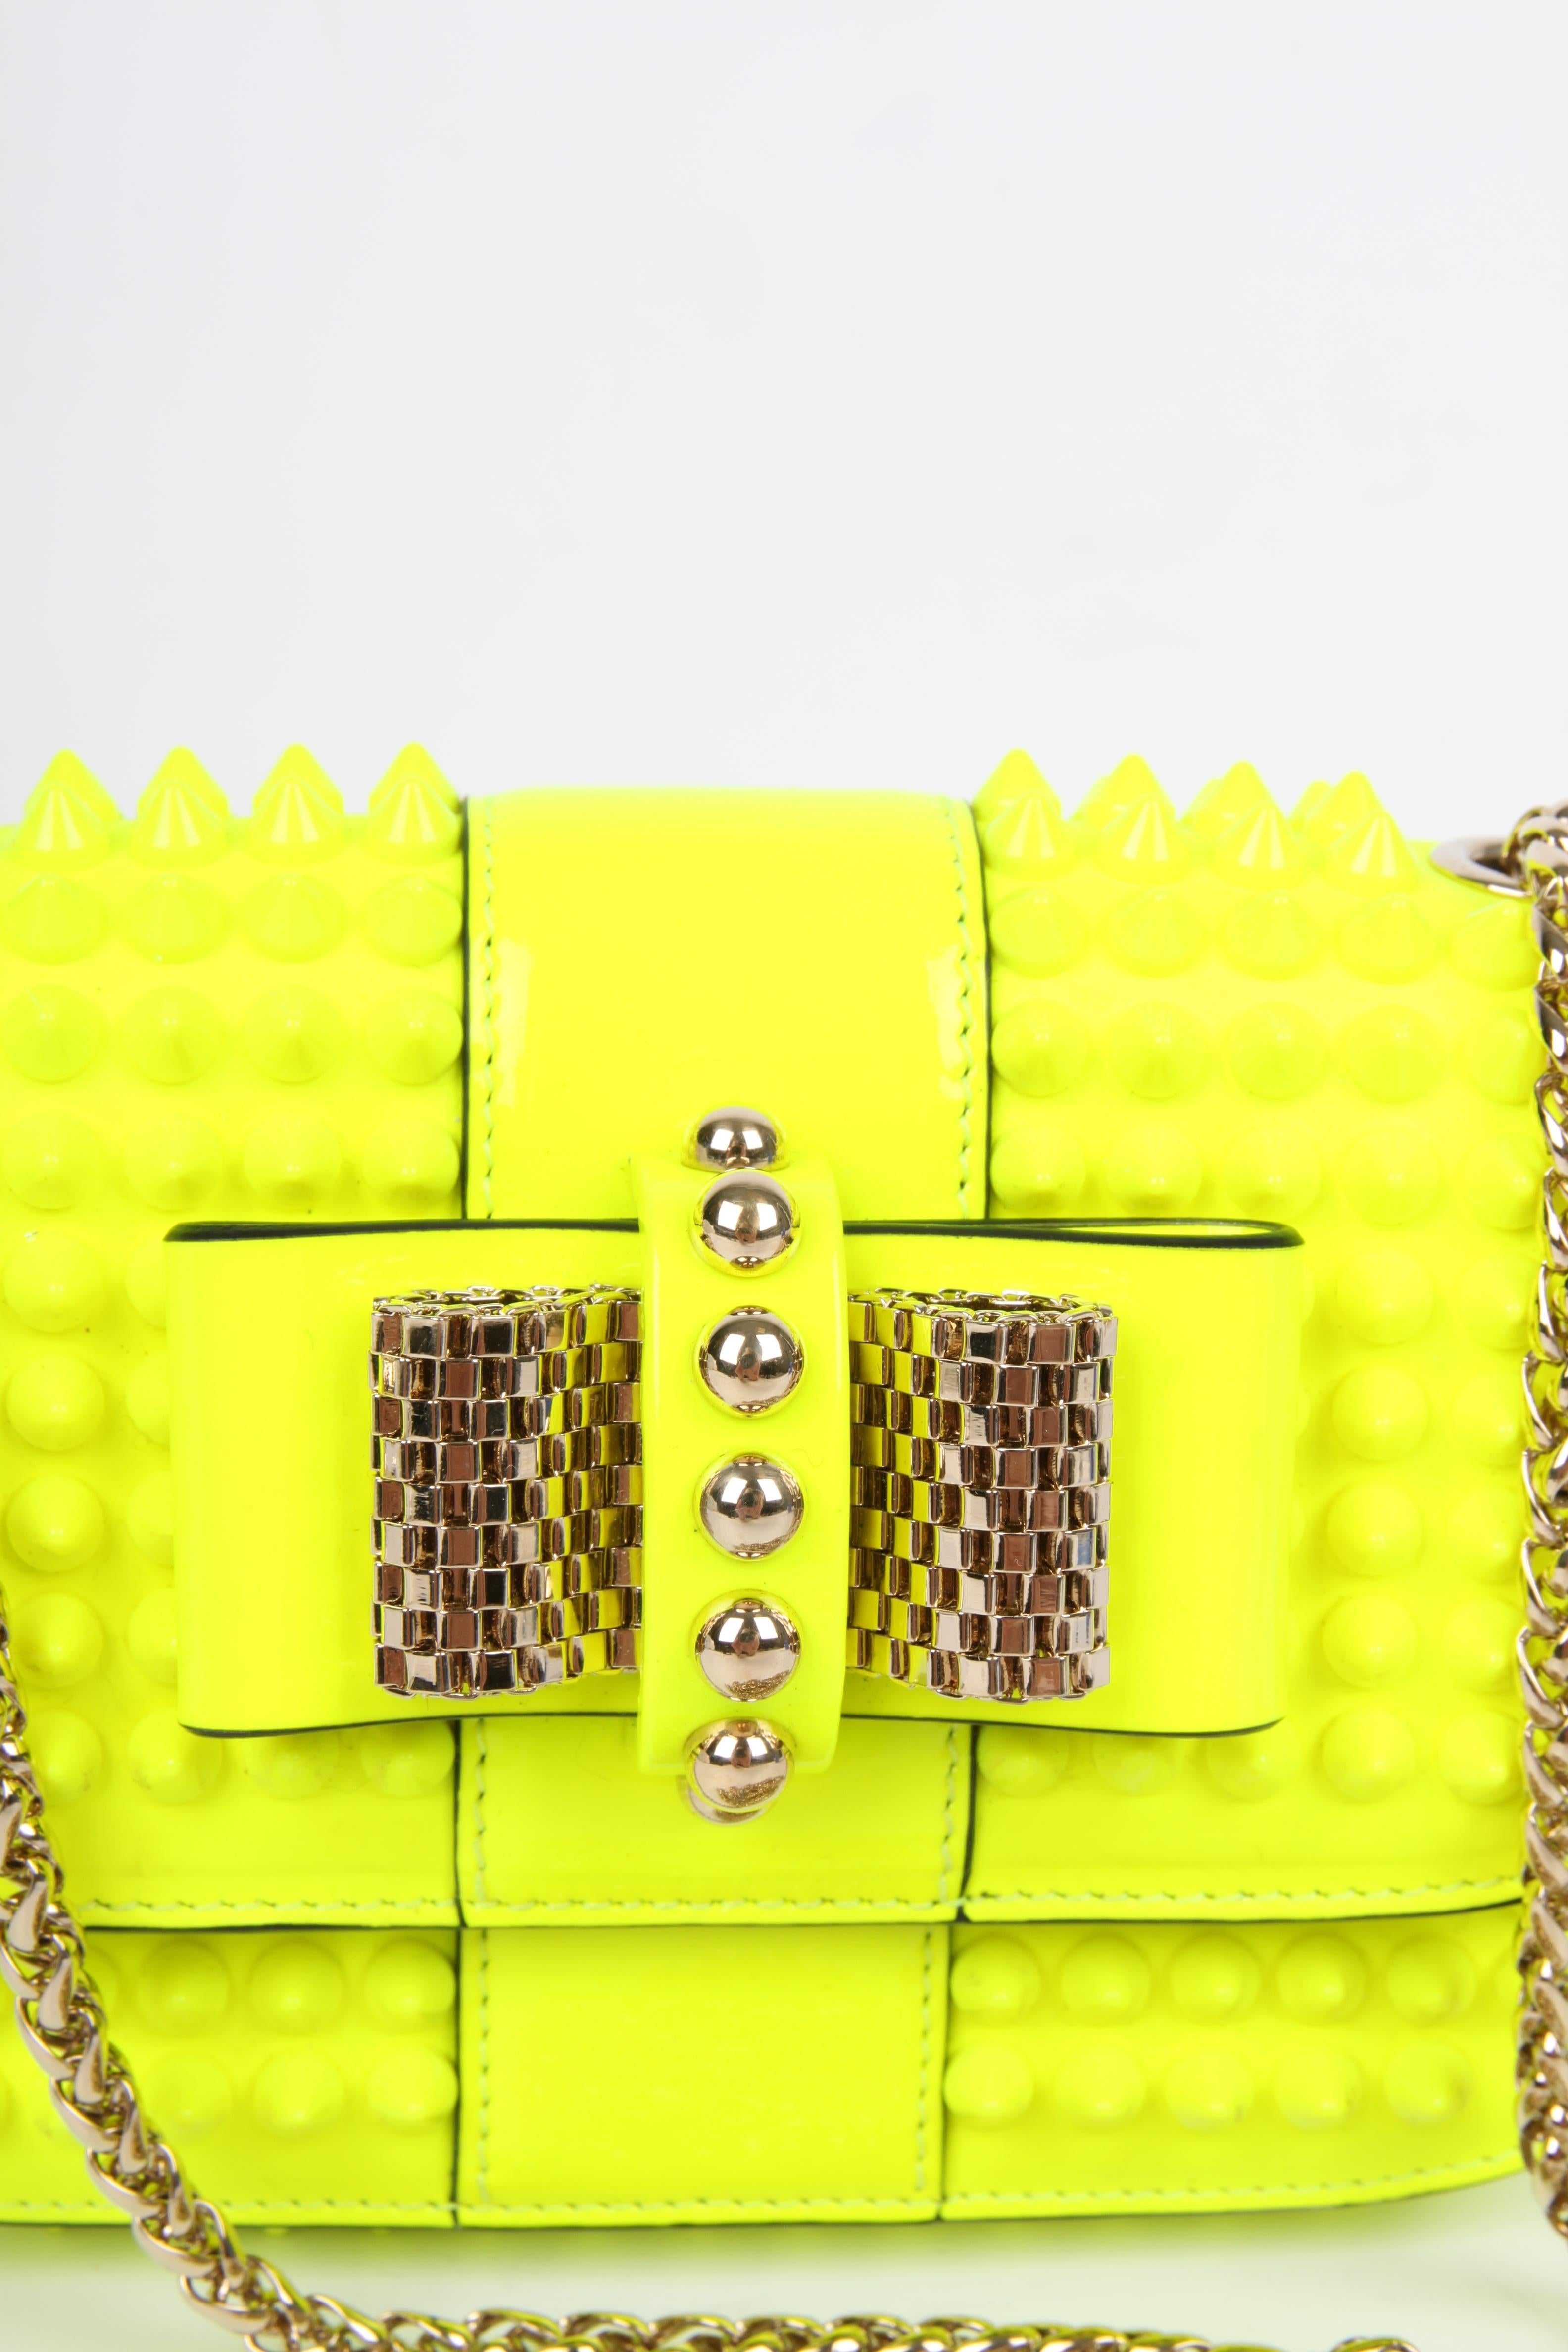 This one really stands out! It's the Sweet Charity Cross Body Bag by Louboutin. A mini bag!

Crafted from neon yellow leather and patent leather with gold-tone hardware. The leather is fully covered with yellow studs. Front closure with a sweet bow